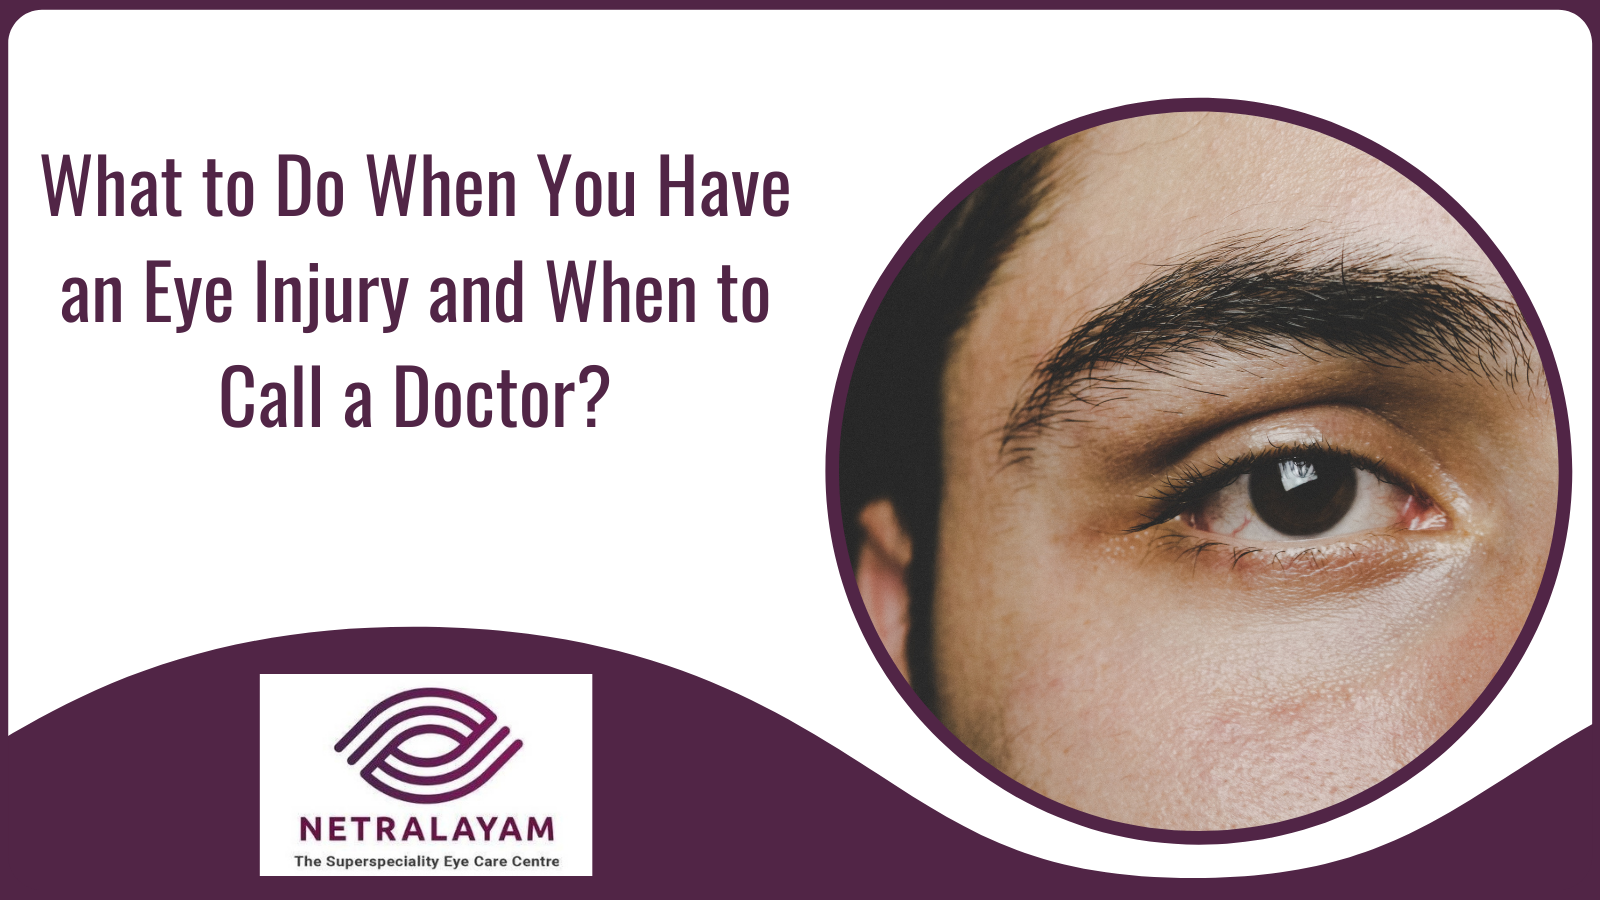 What to Do When You Have an Eye Injury and When to Call a Doctor?